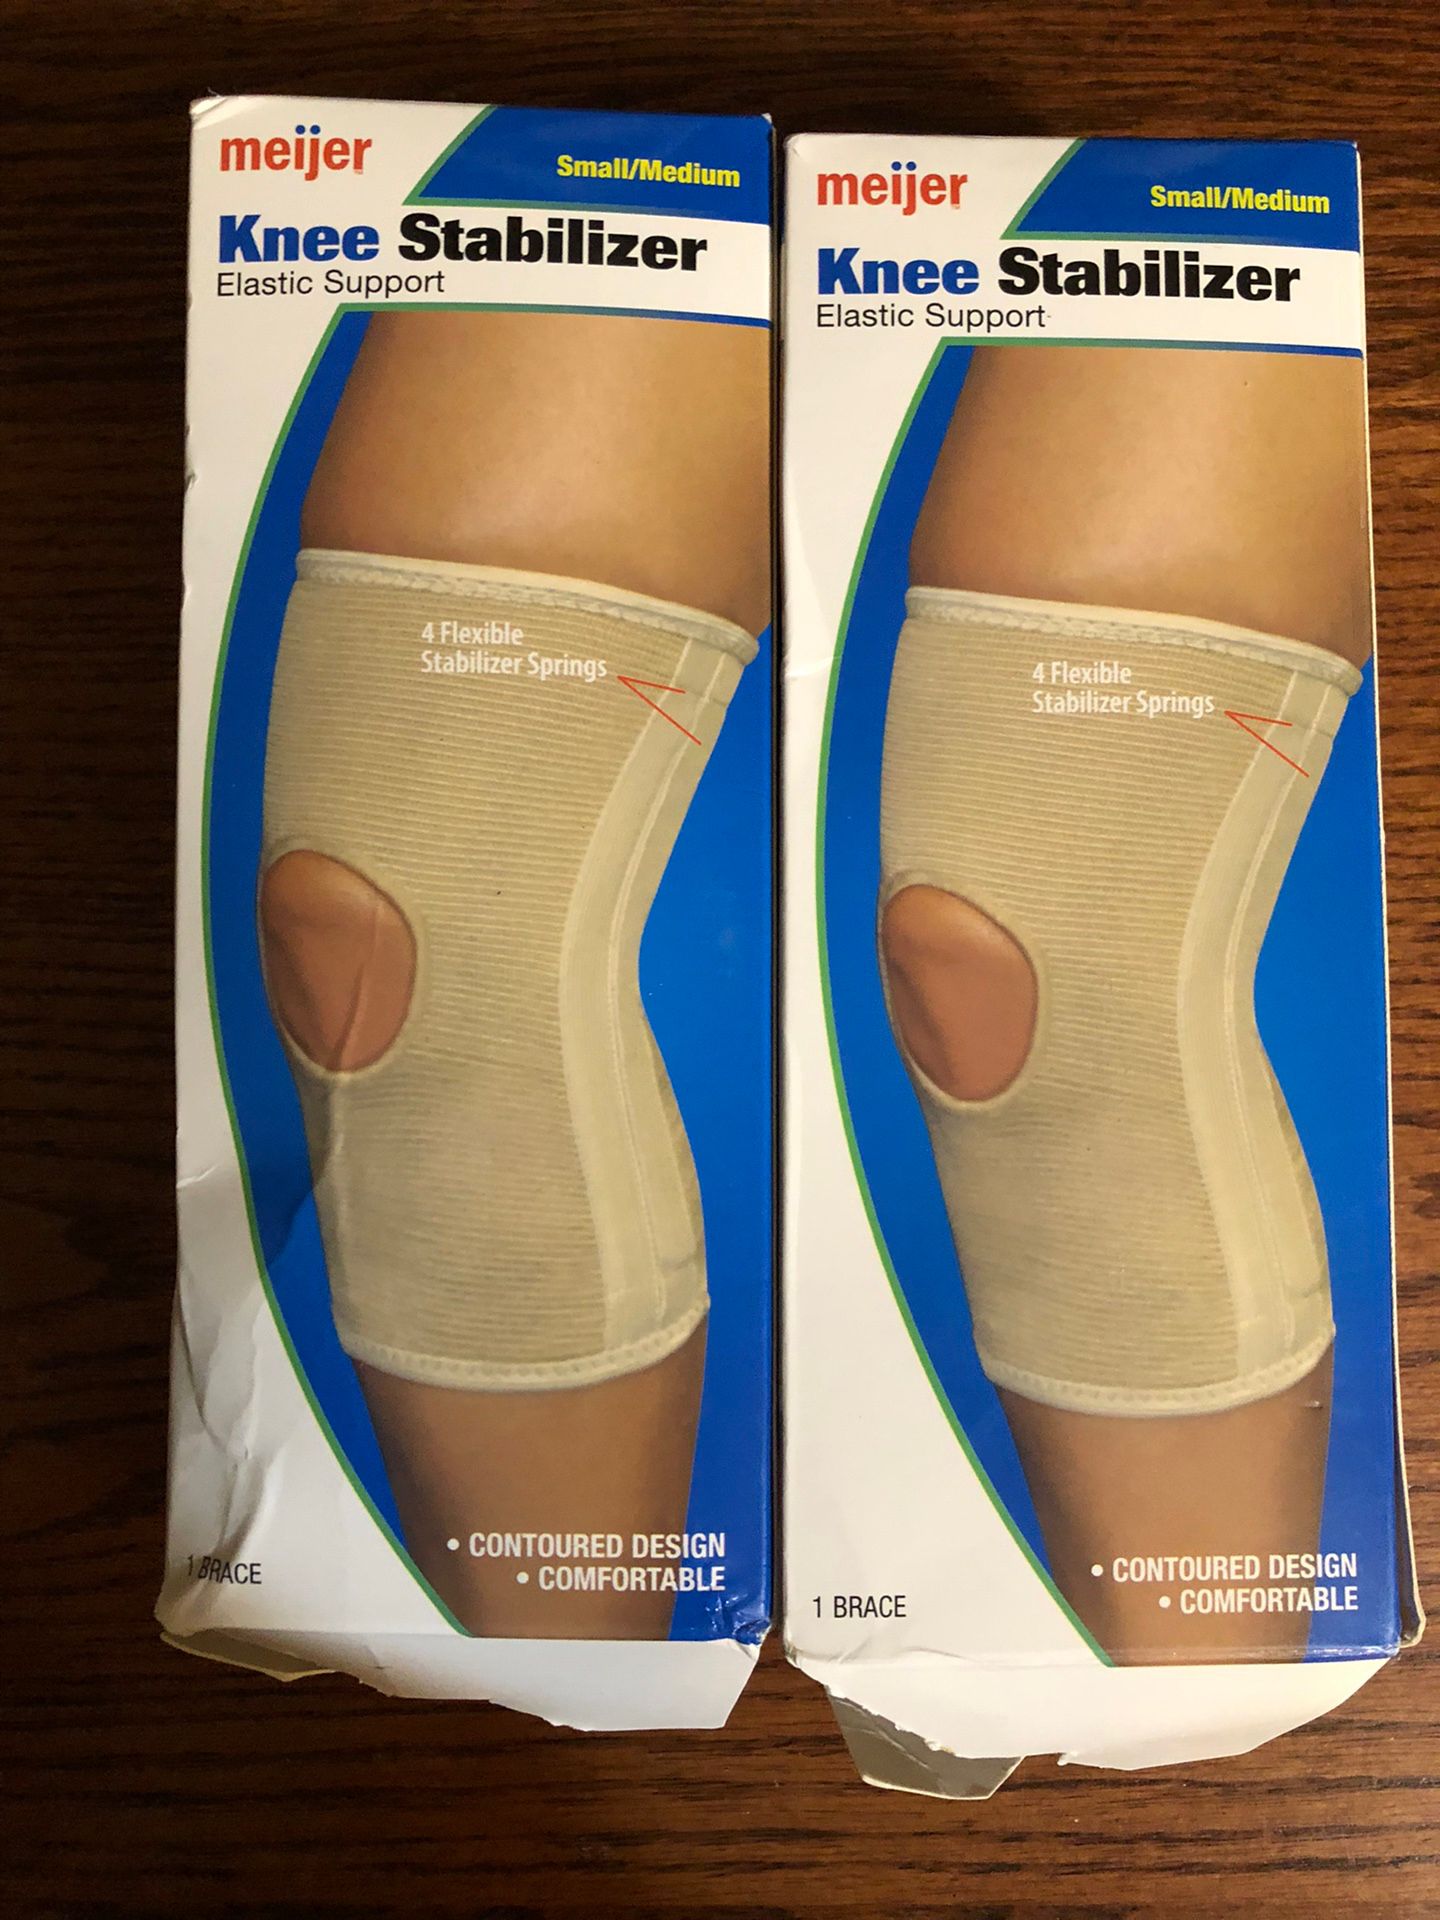 2 Knee Stabilizers - New In Boxes